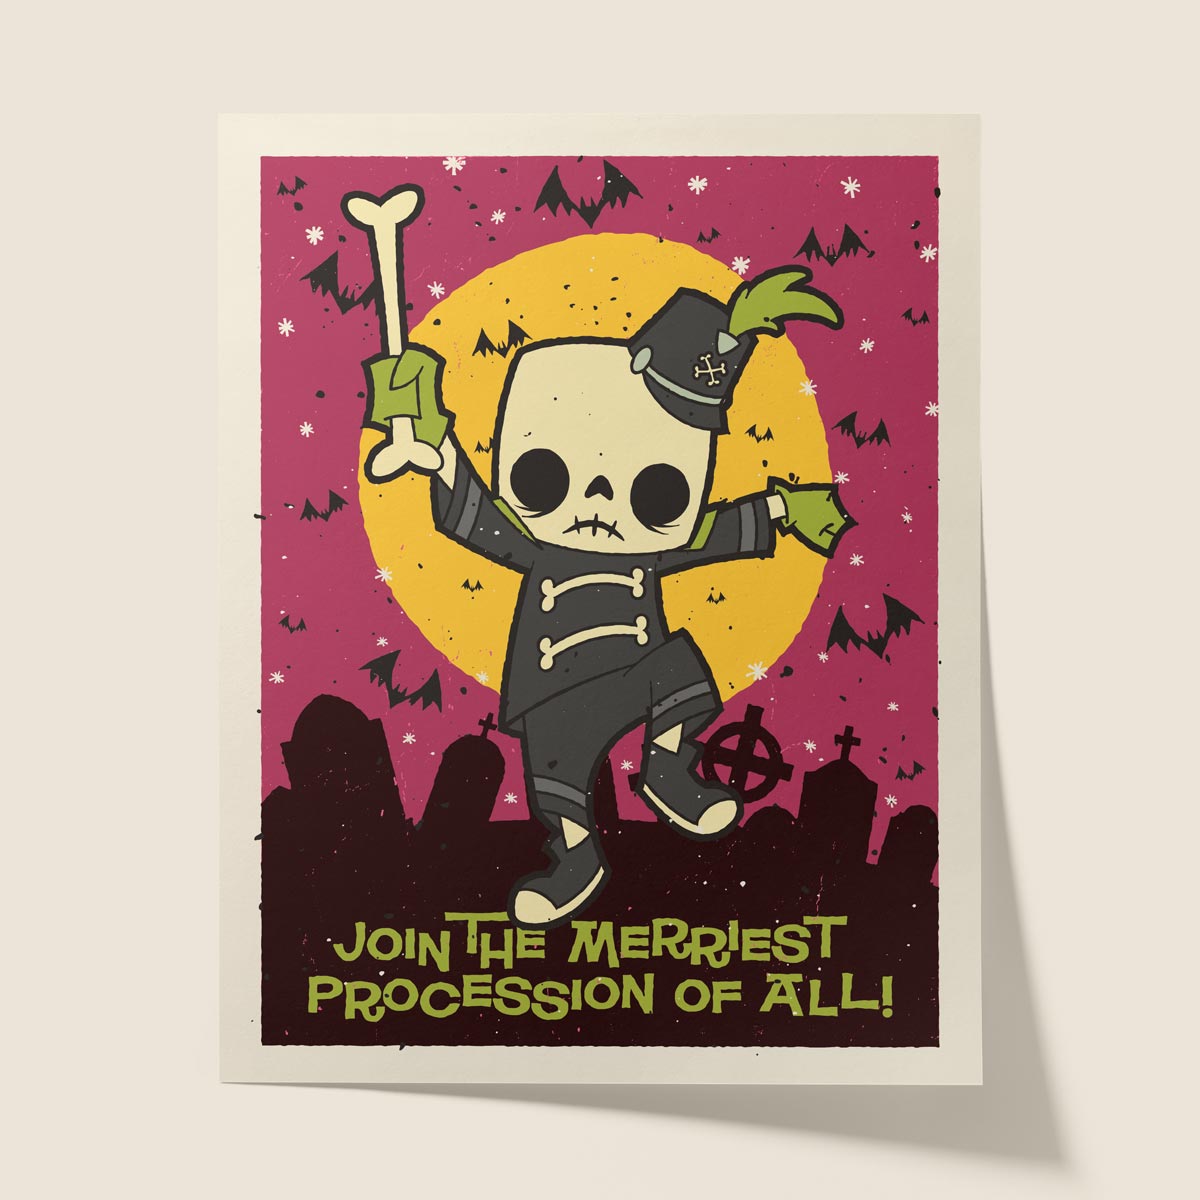 The Merriest Procession Print